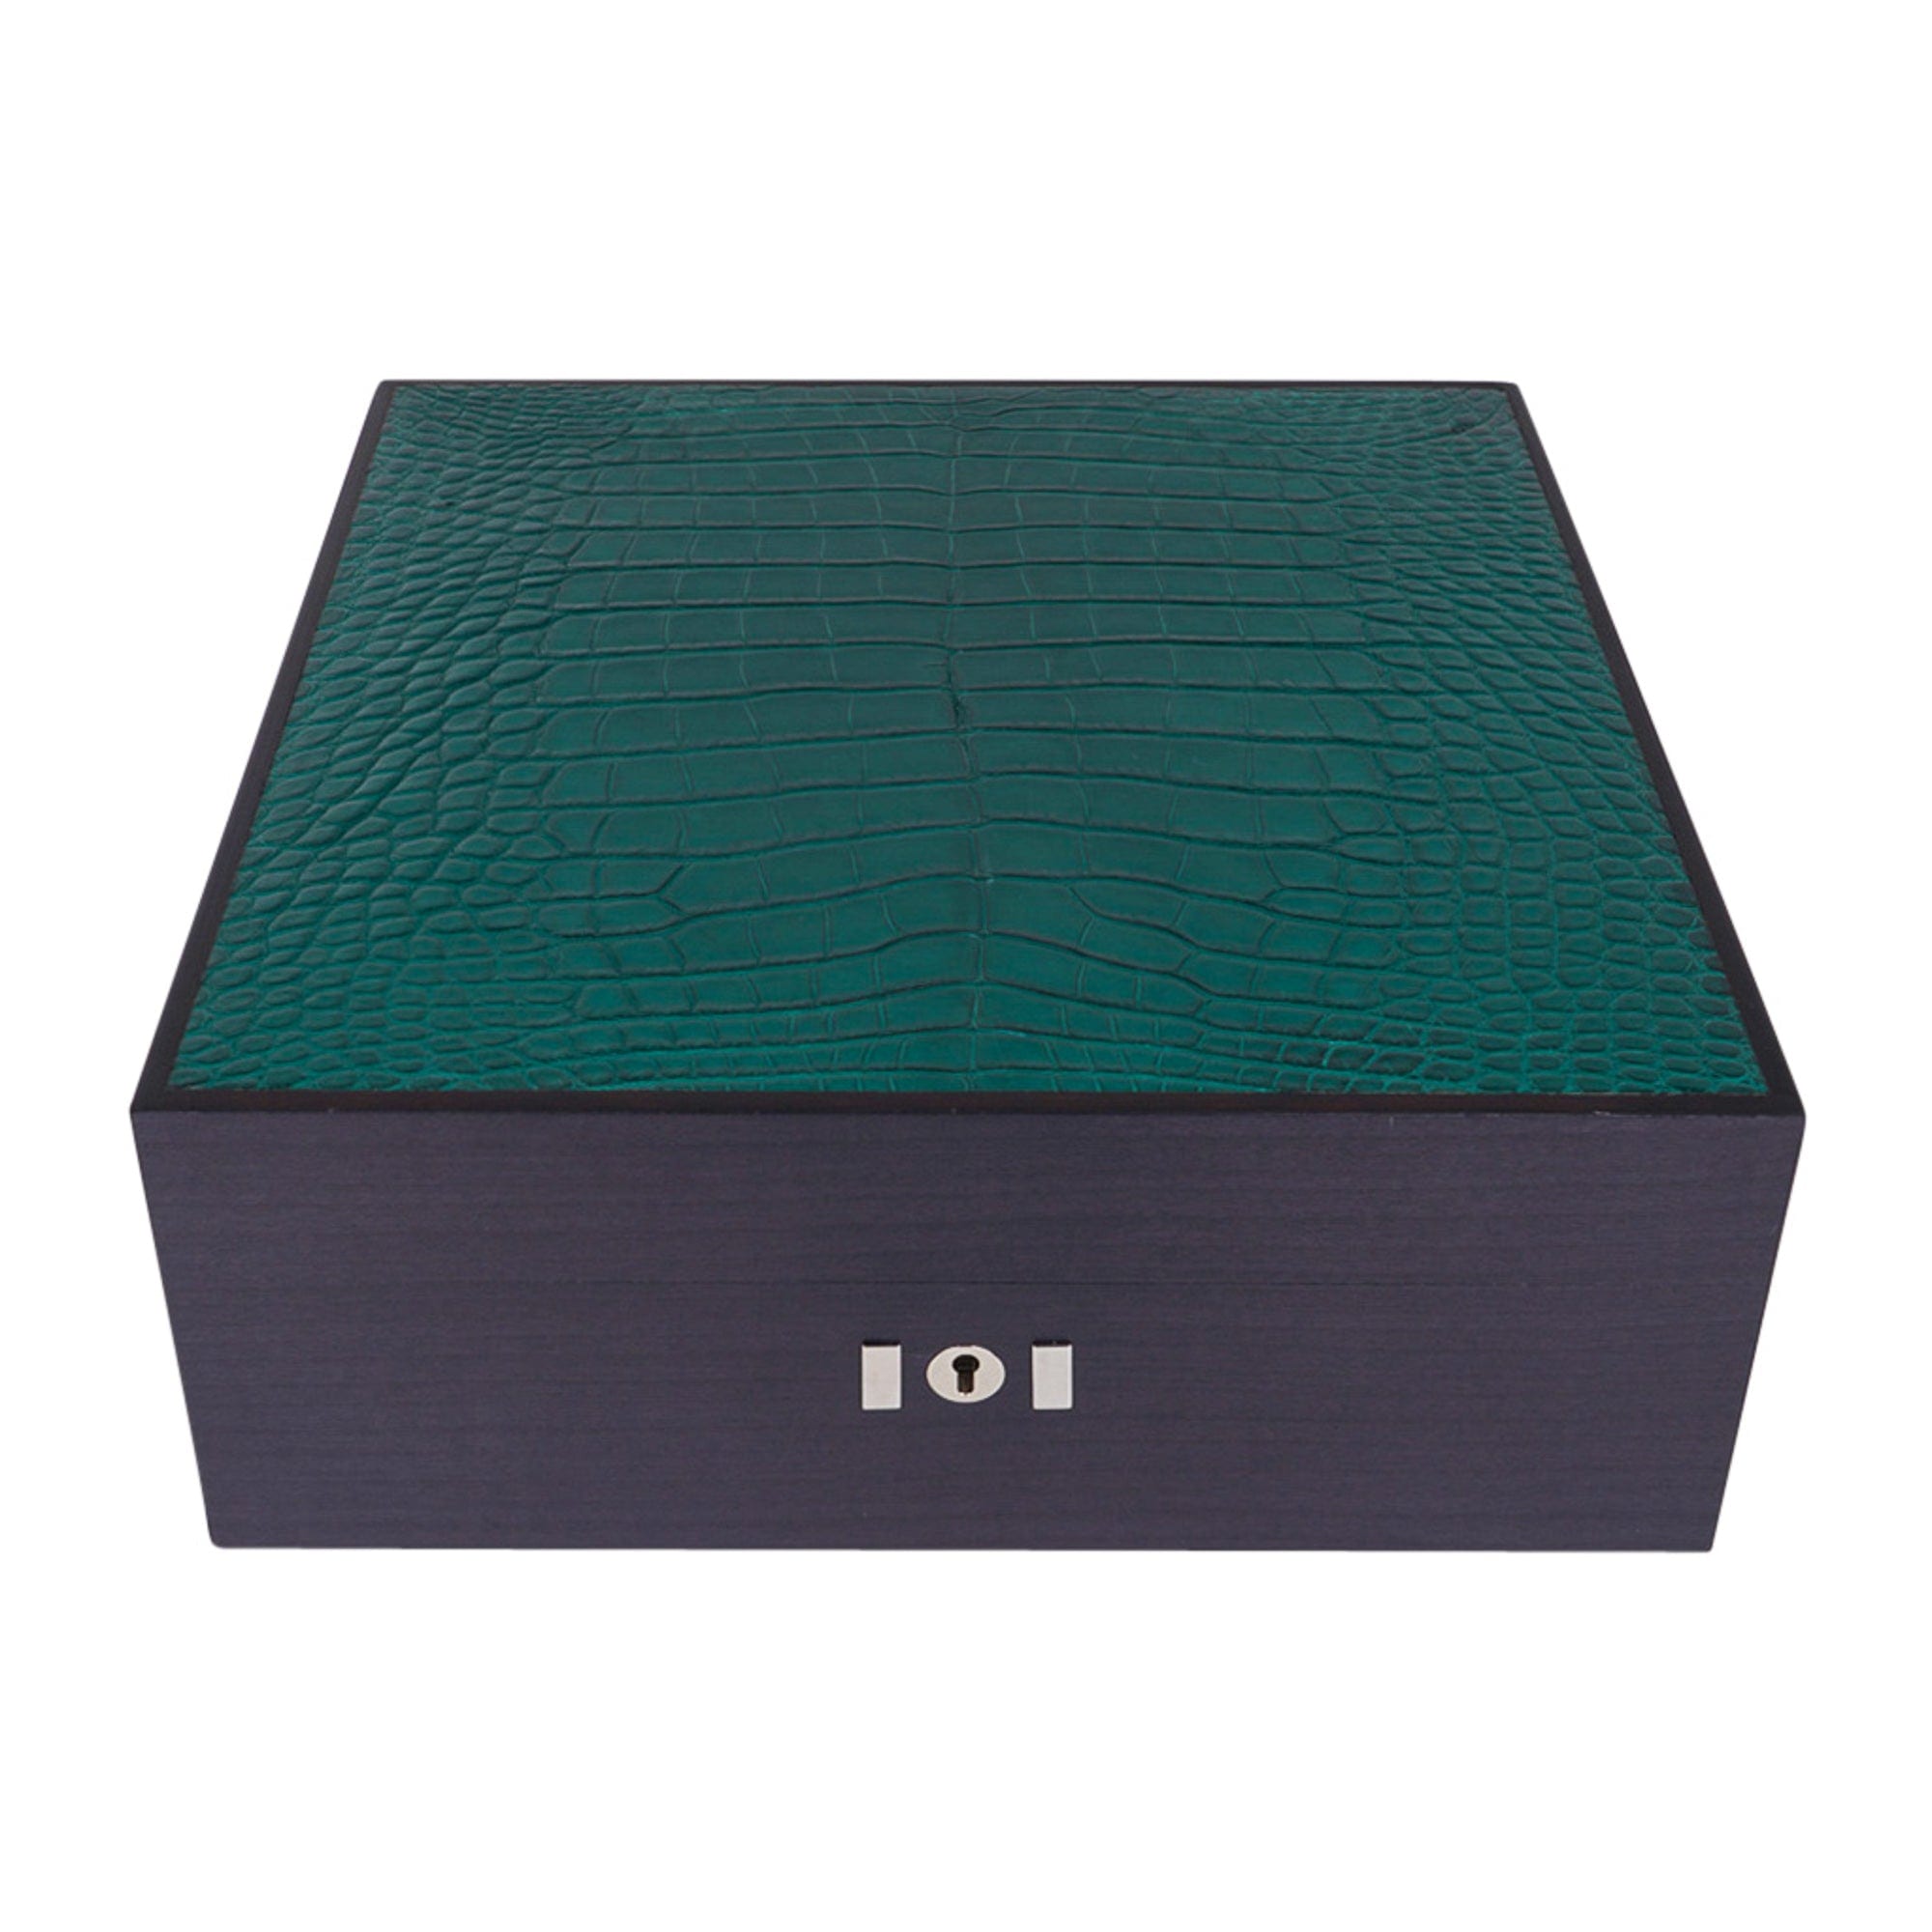 Hermes Watch Box Vert Titien Matte Alligator Lid Sycamore Wood Limited Edition